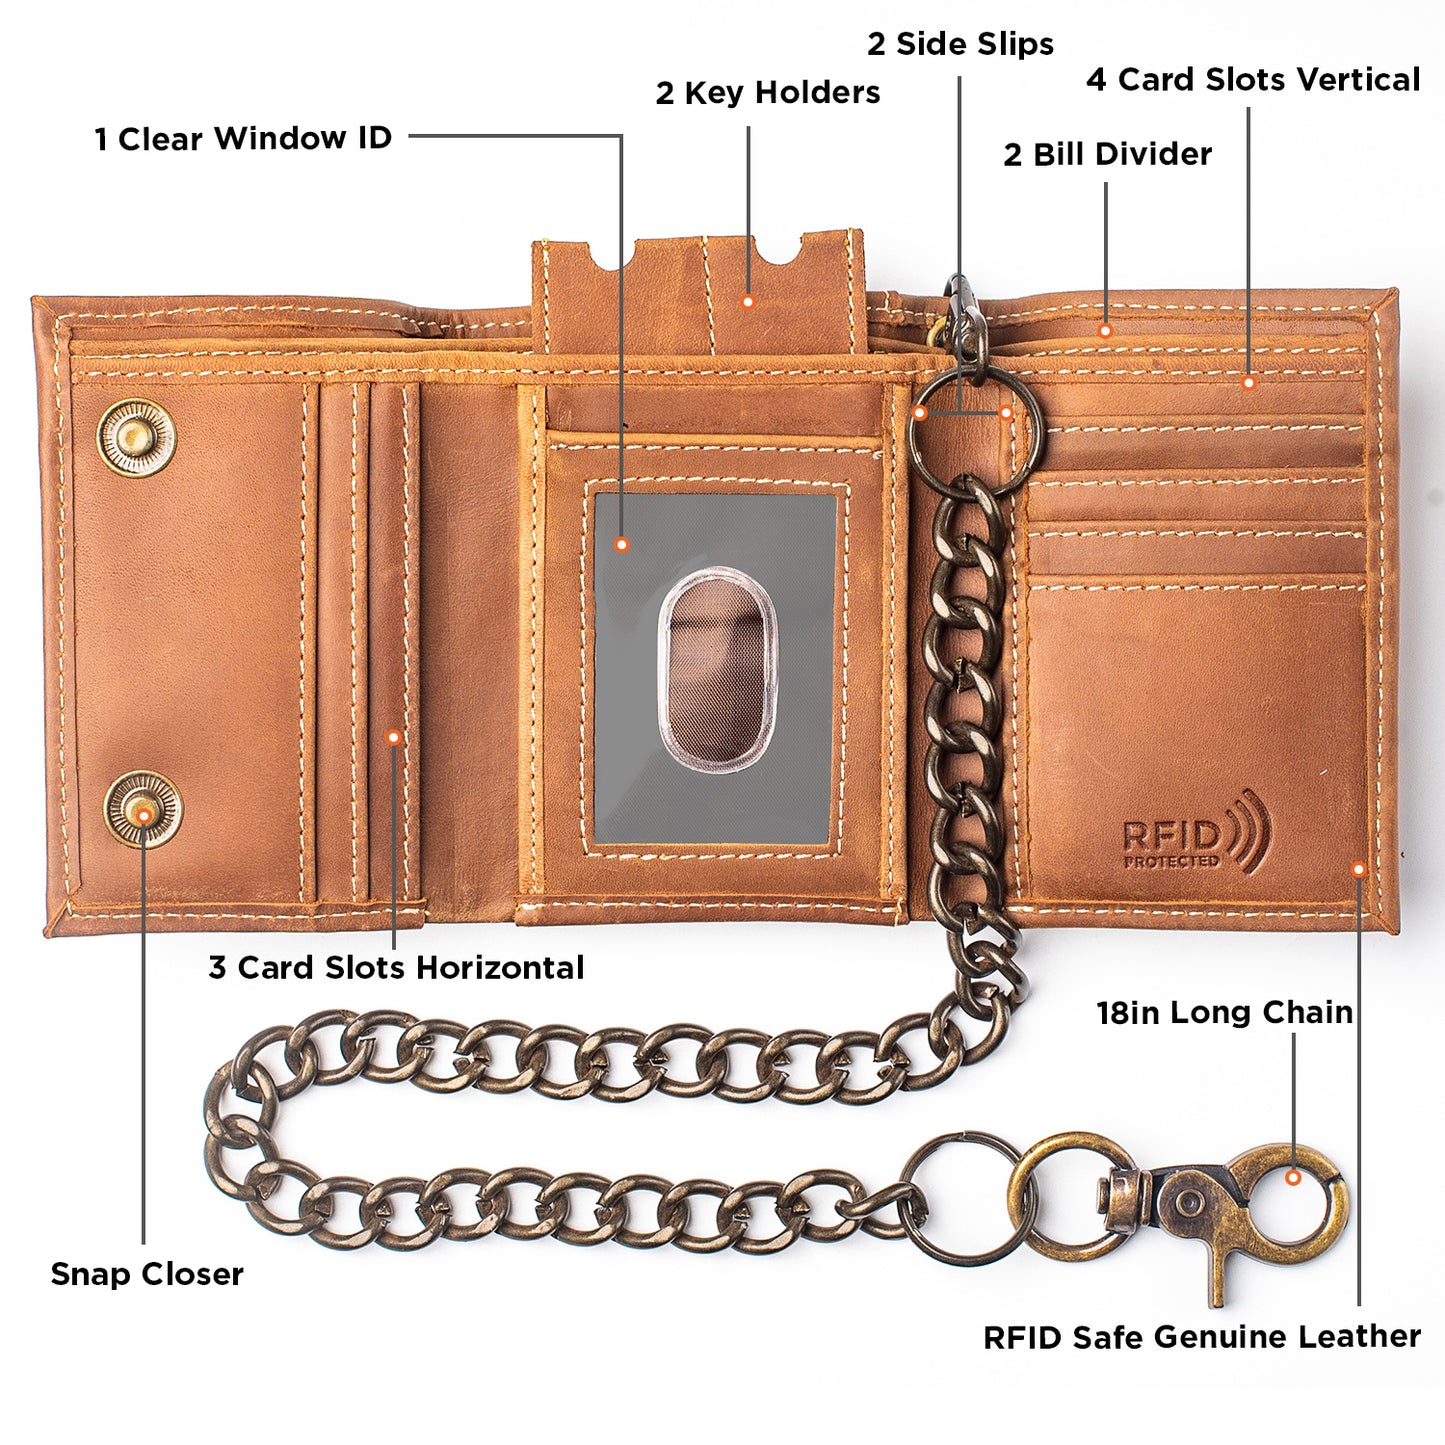 Chain Wallet for Men Trifold RFID safe Leather Snap Closed Stainless Biker Chain 18'inch Long